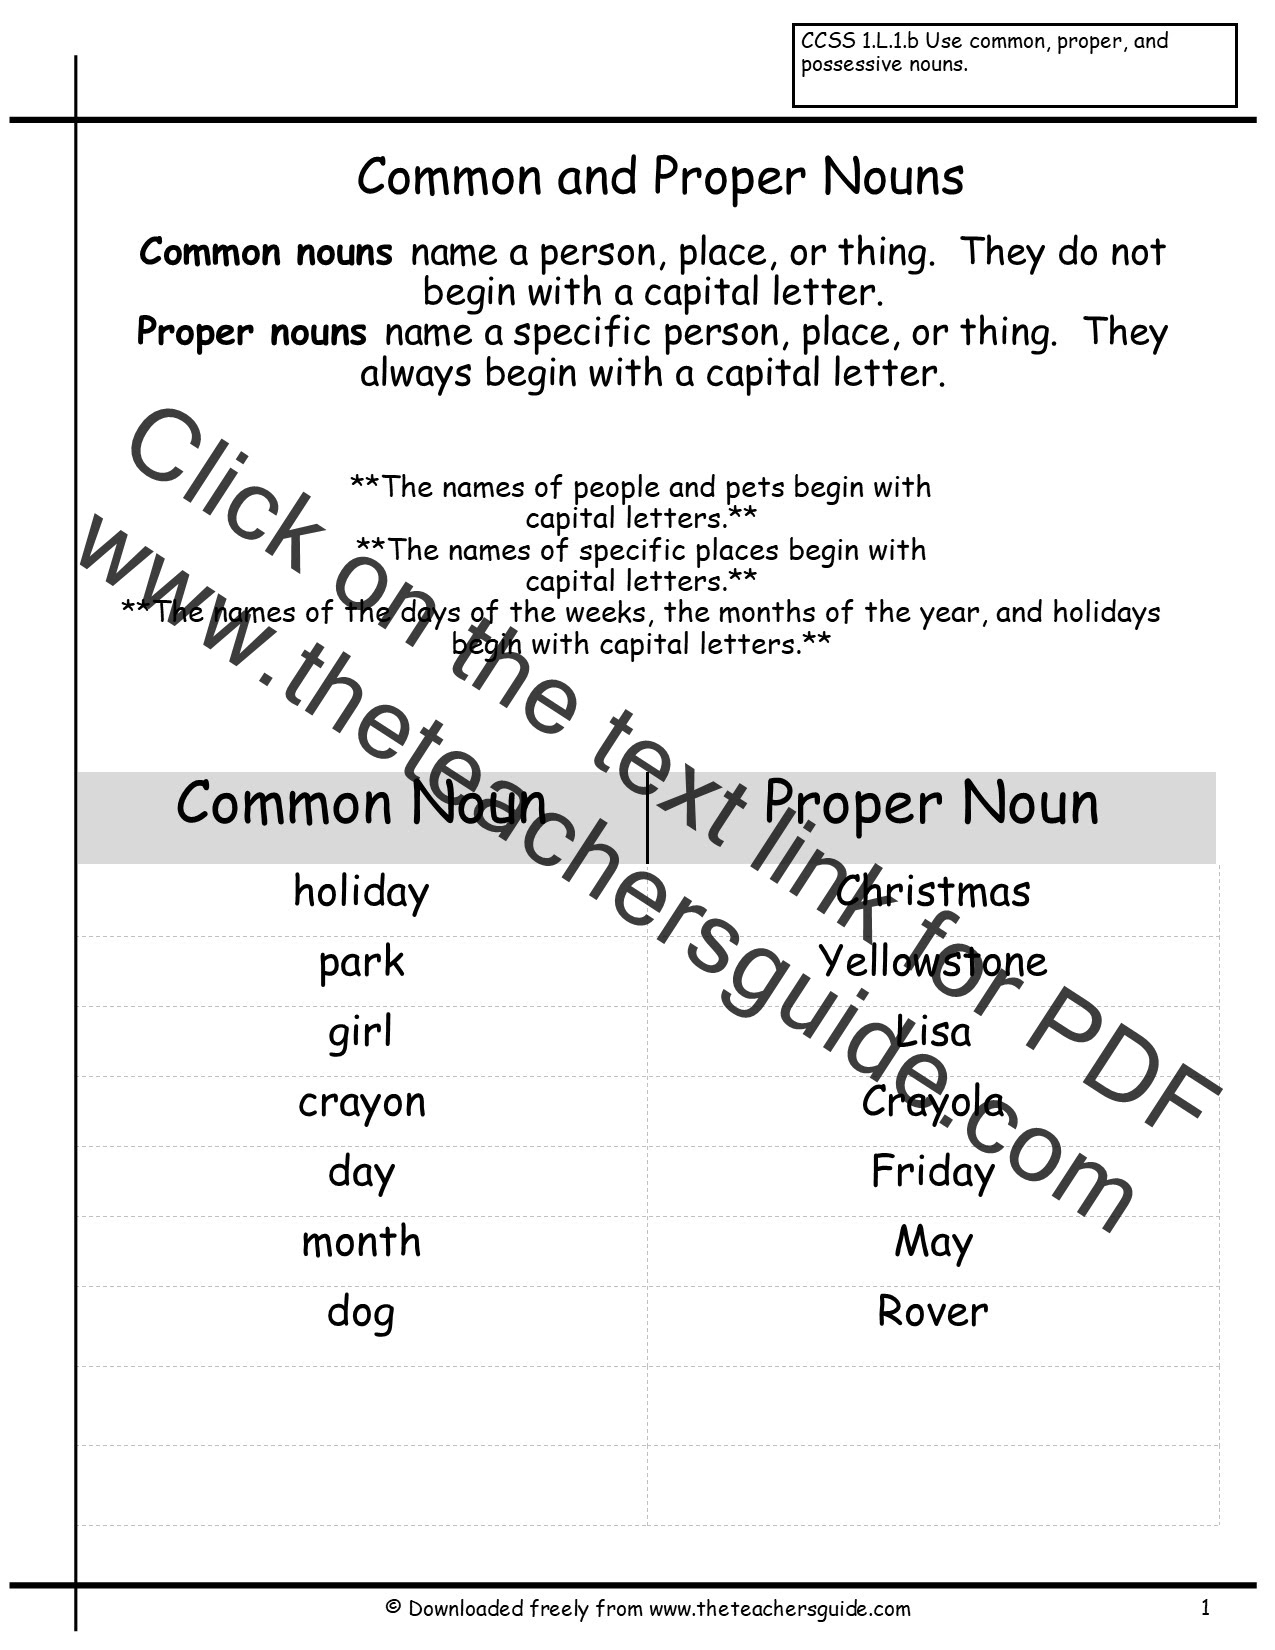 common-and-proper-noun-worksheet-for-class-3-capitalizing-proper-nouns-worksheet-nouns